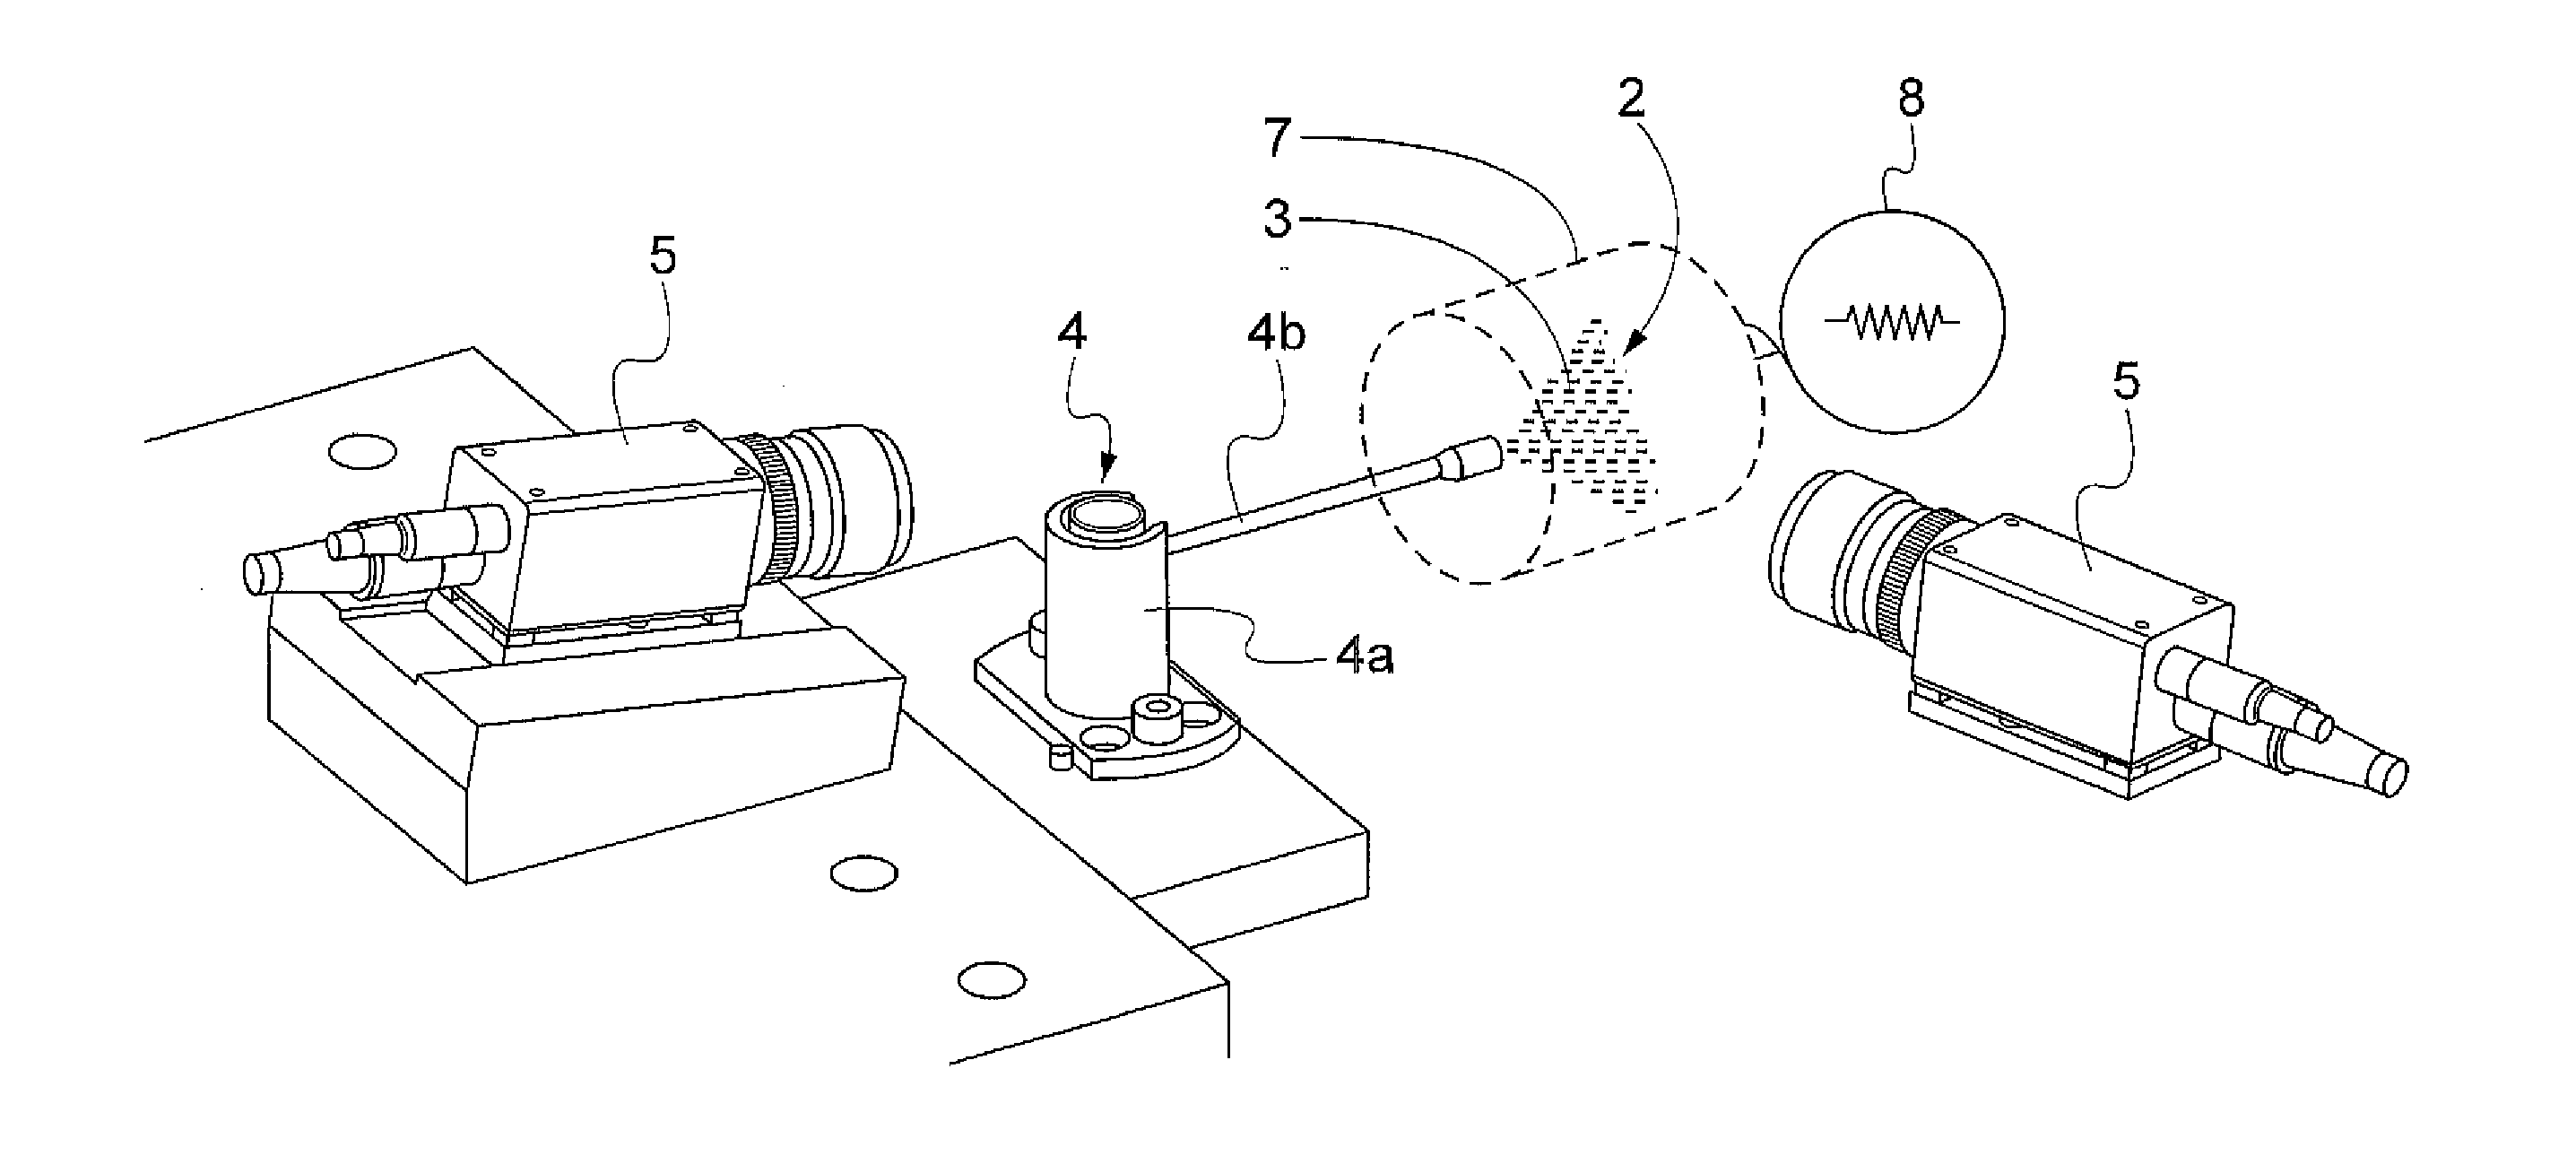 Device for controlling the distribution of fluid ejected from a fluid nebulizing dispenser